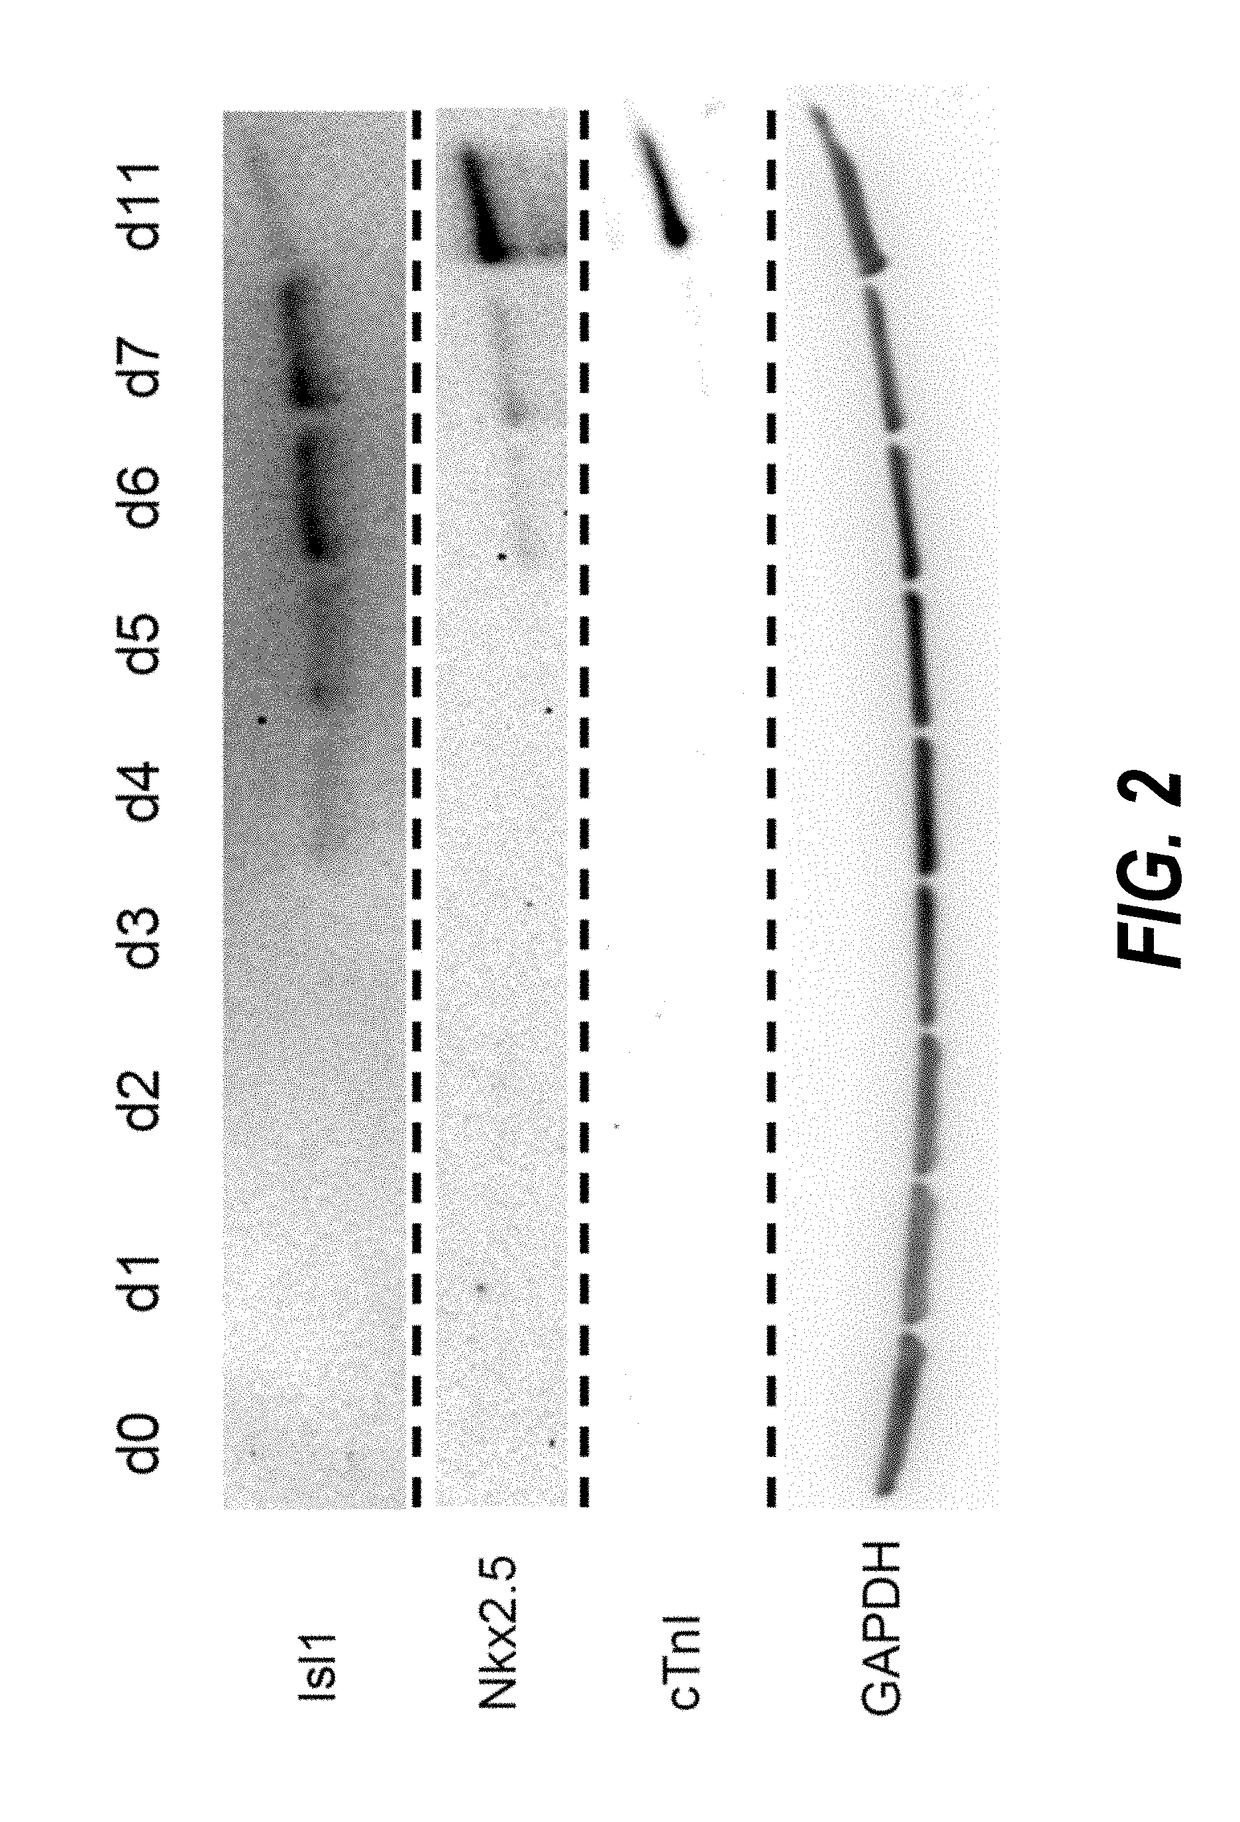 Methods for isolating human cardiac ventricular progenitor cells